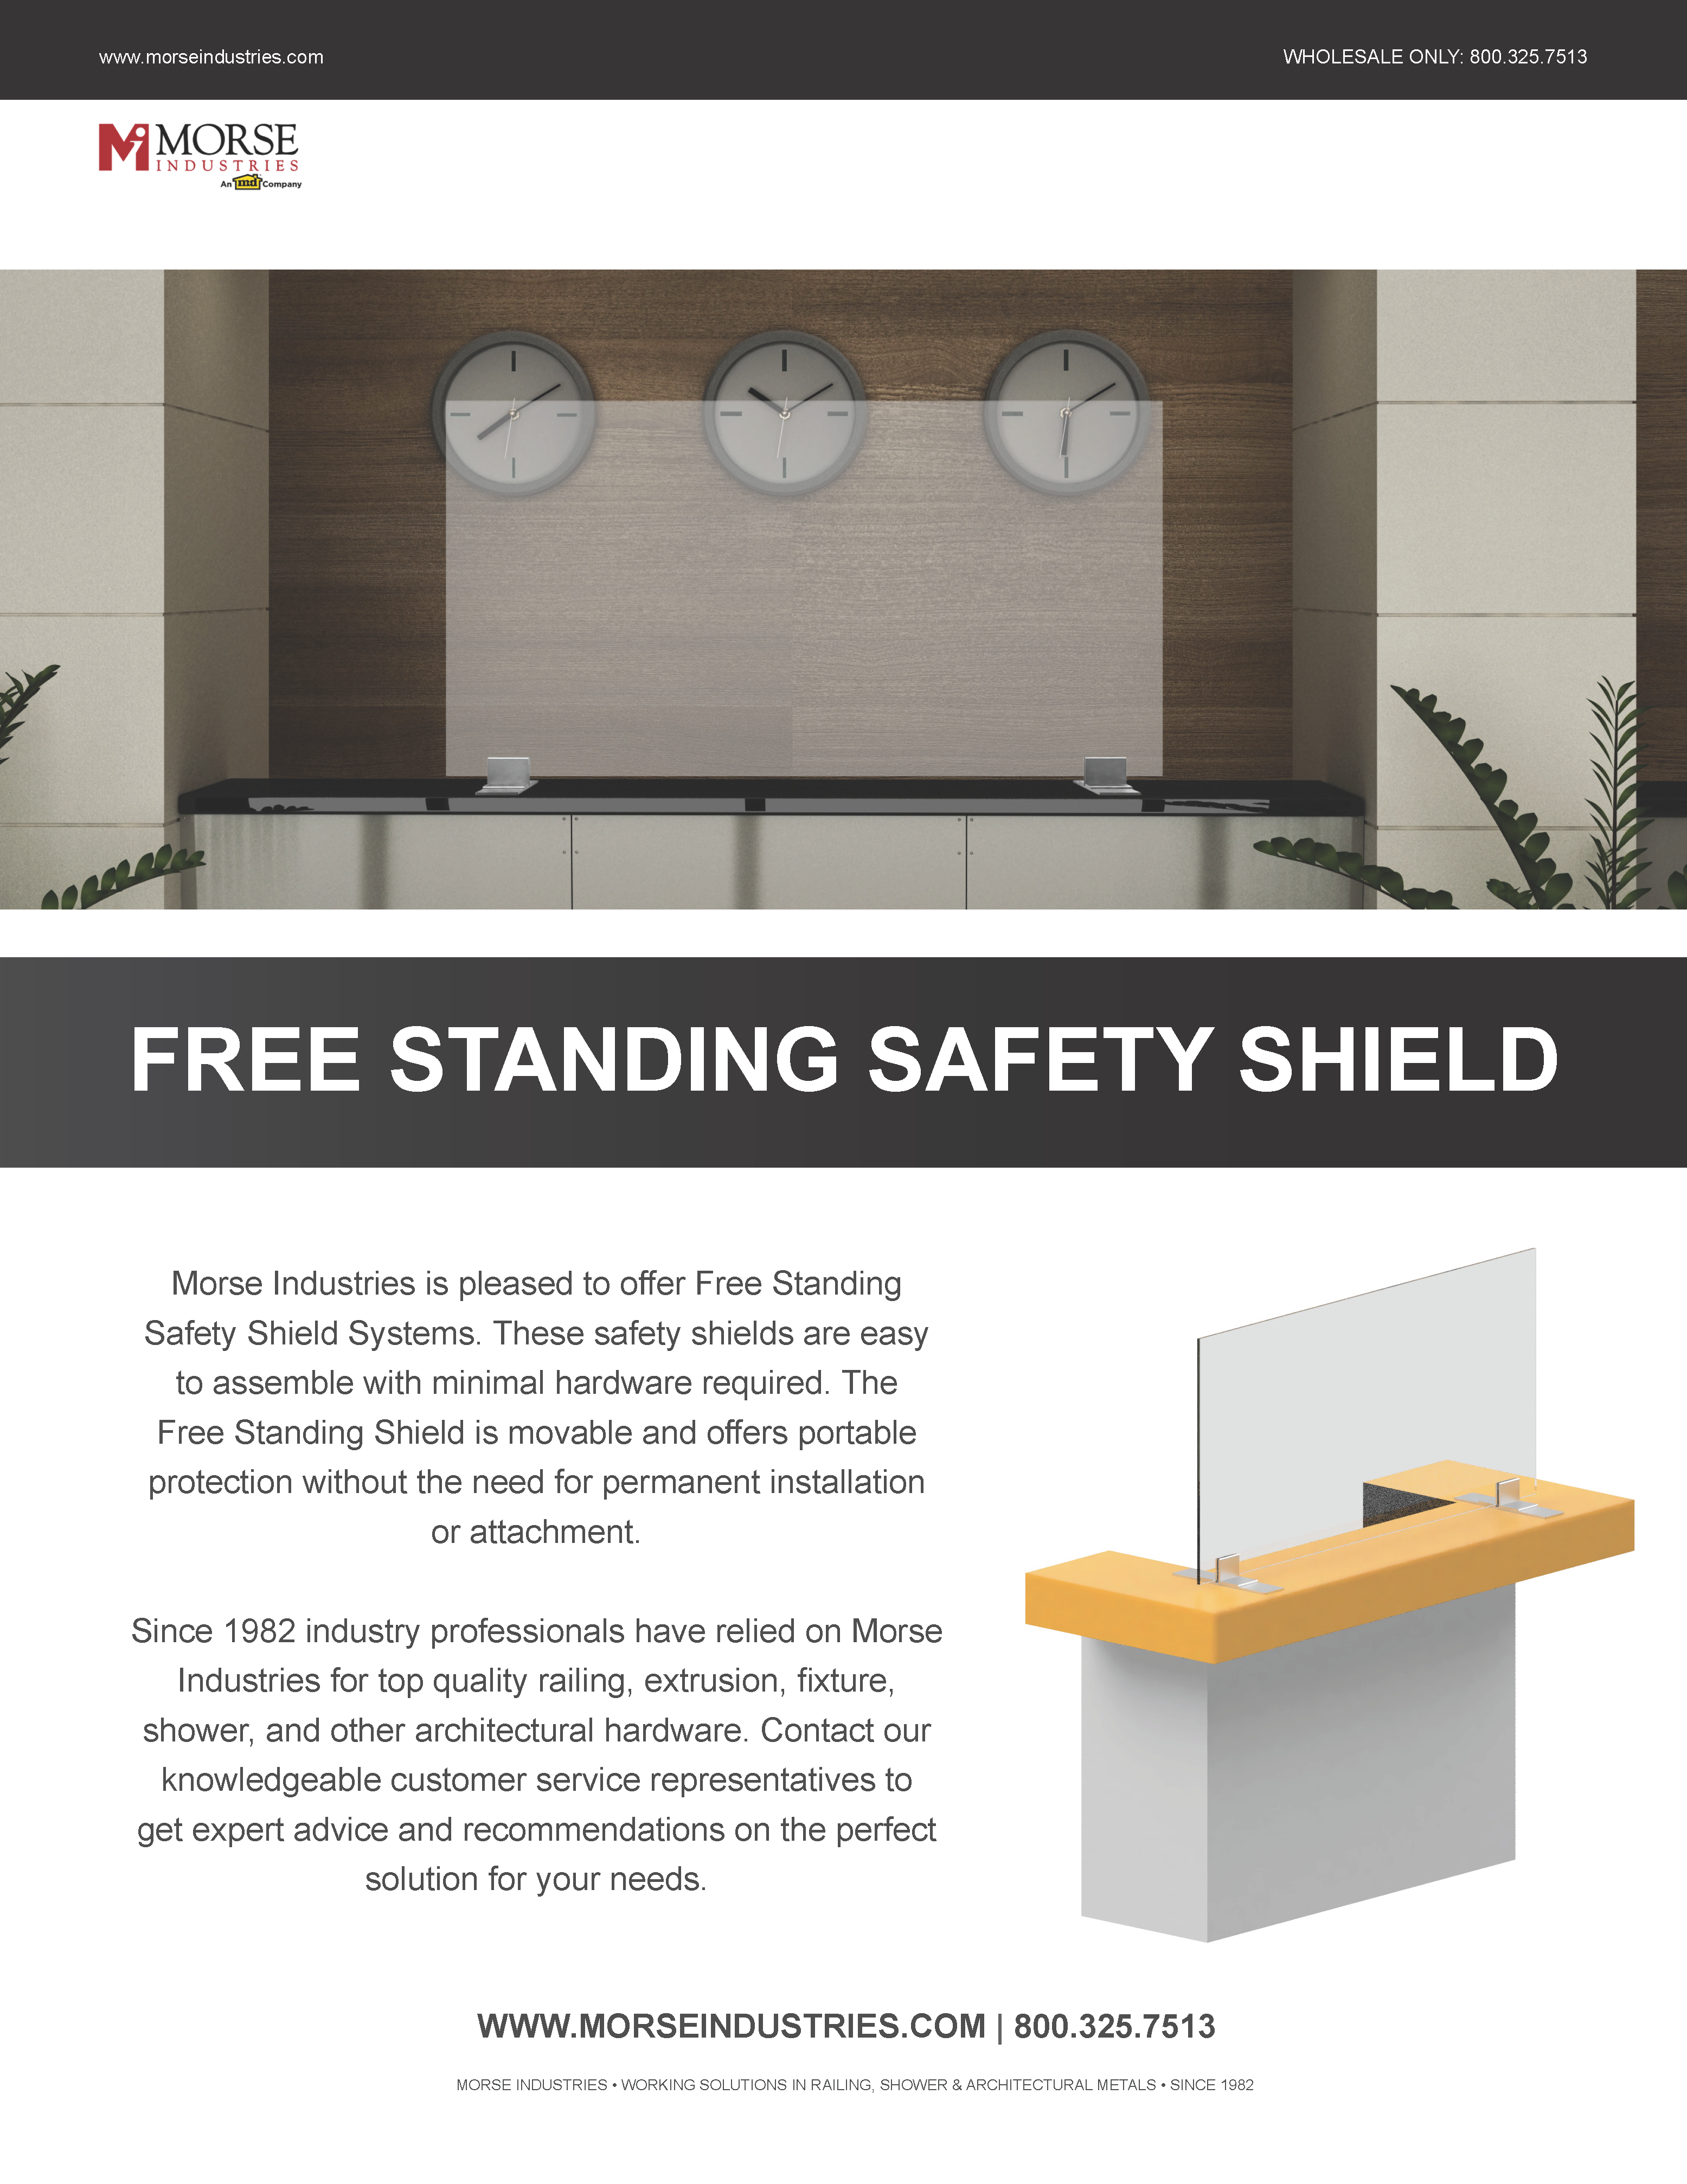 Free Standing Safety Shield